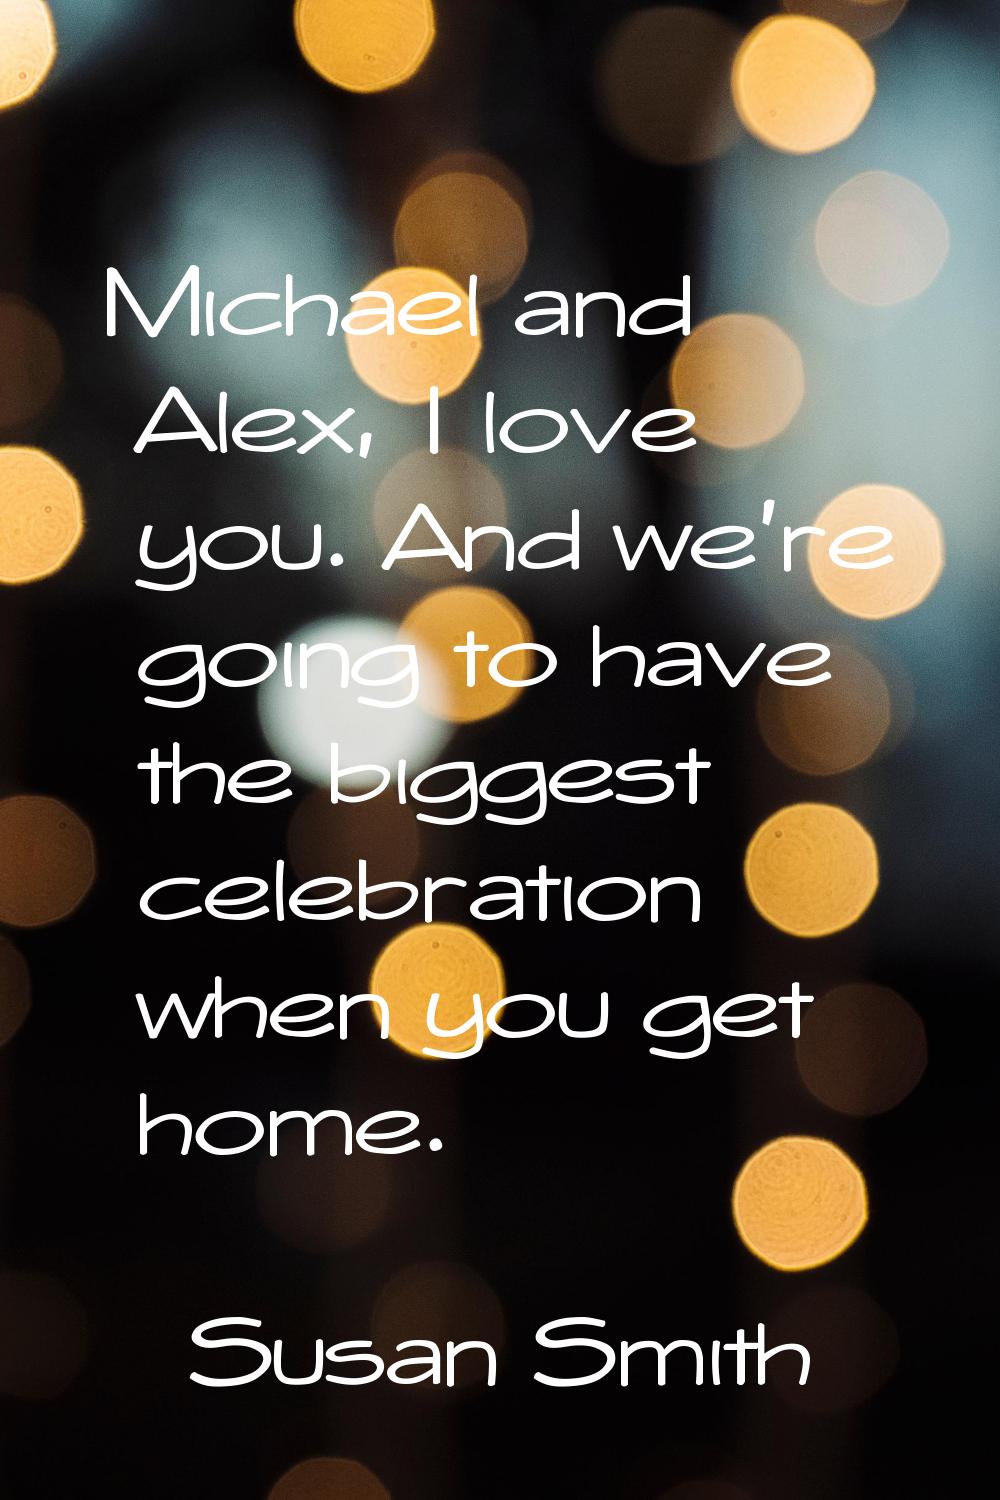 Michael and Alex, I love you. And we're going to have the biggest celebration when you get home.